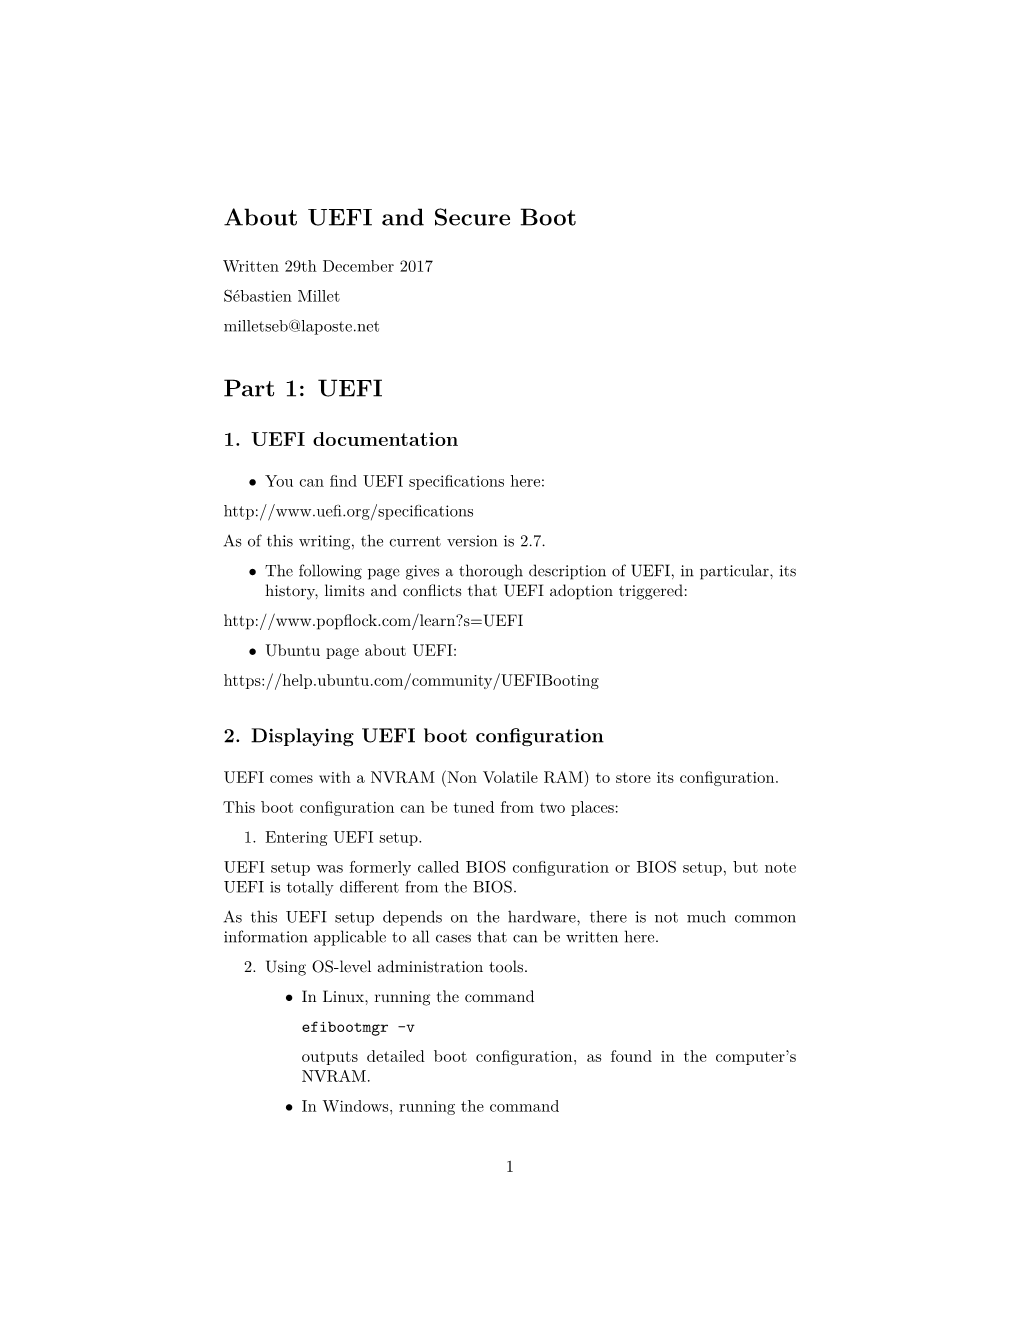 About UEFI and Secure Boot Part 1